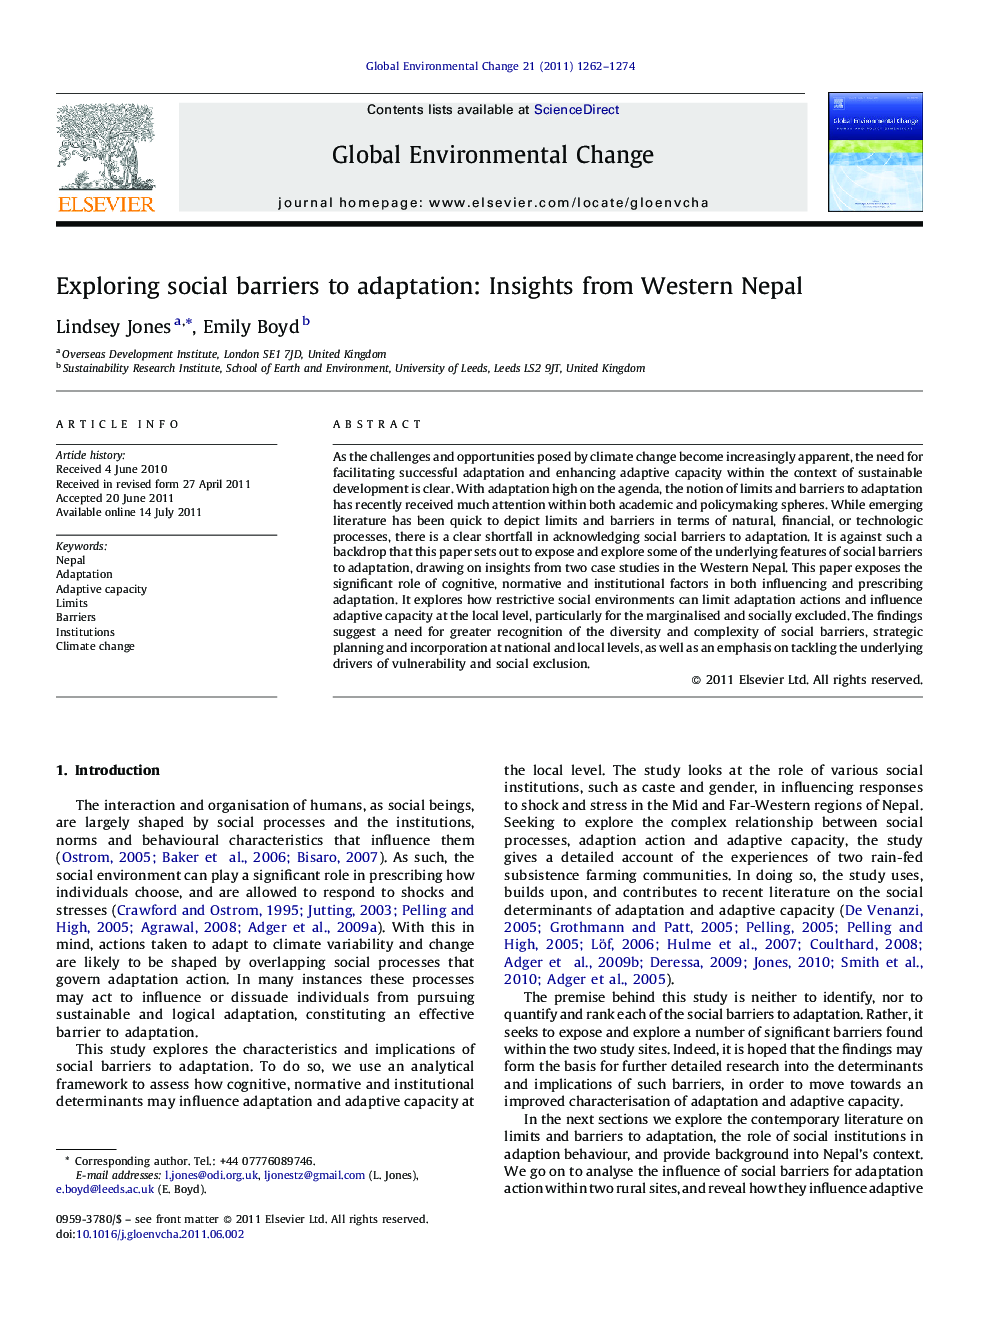 Exploring social barriers to adaptation: Insights from Western Nepal